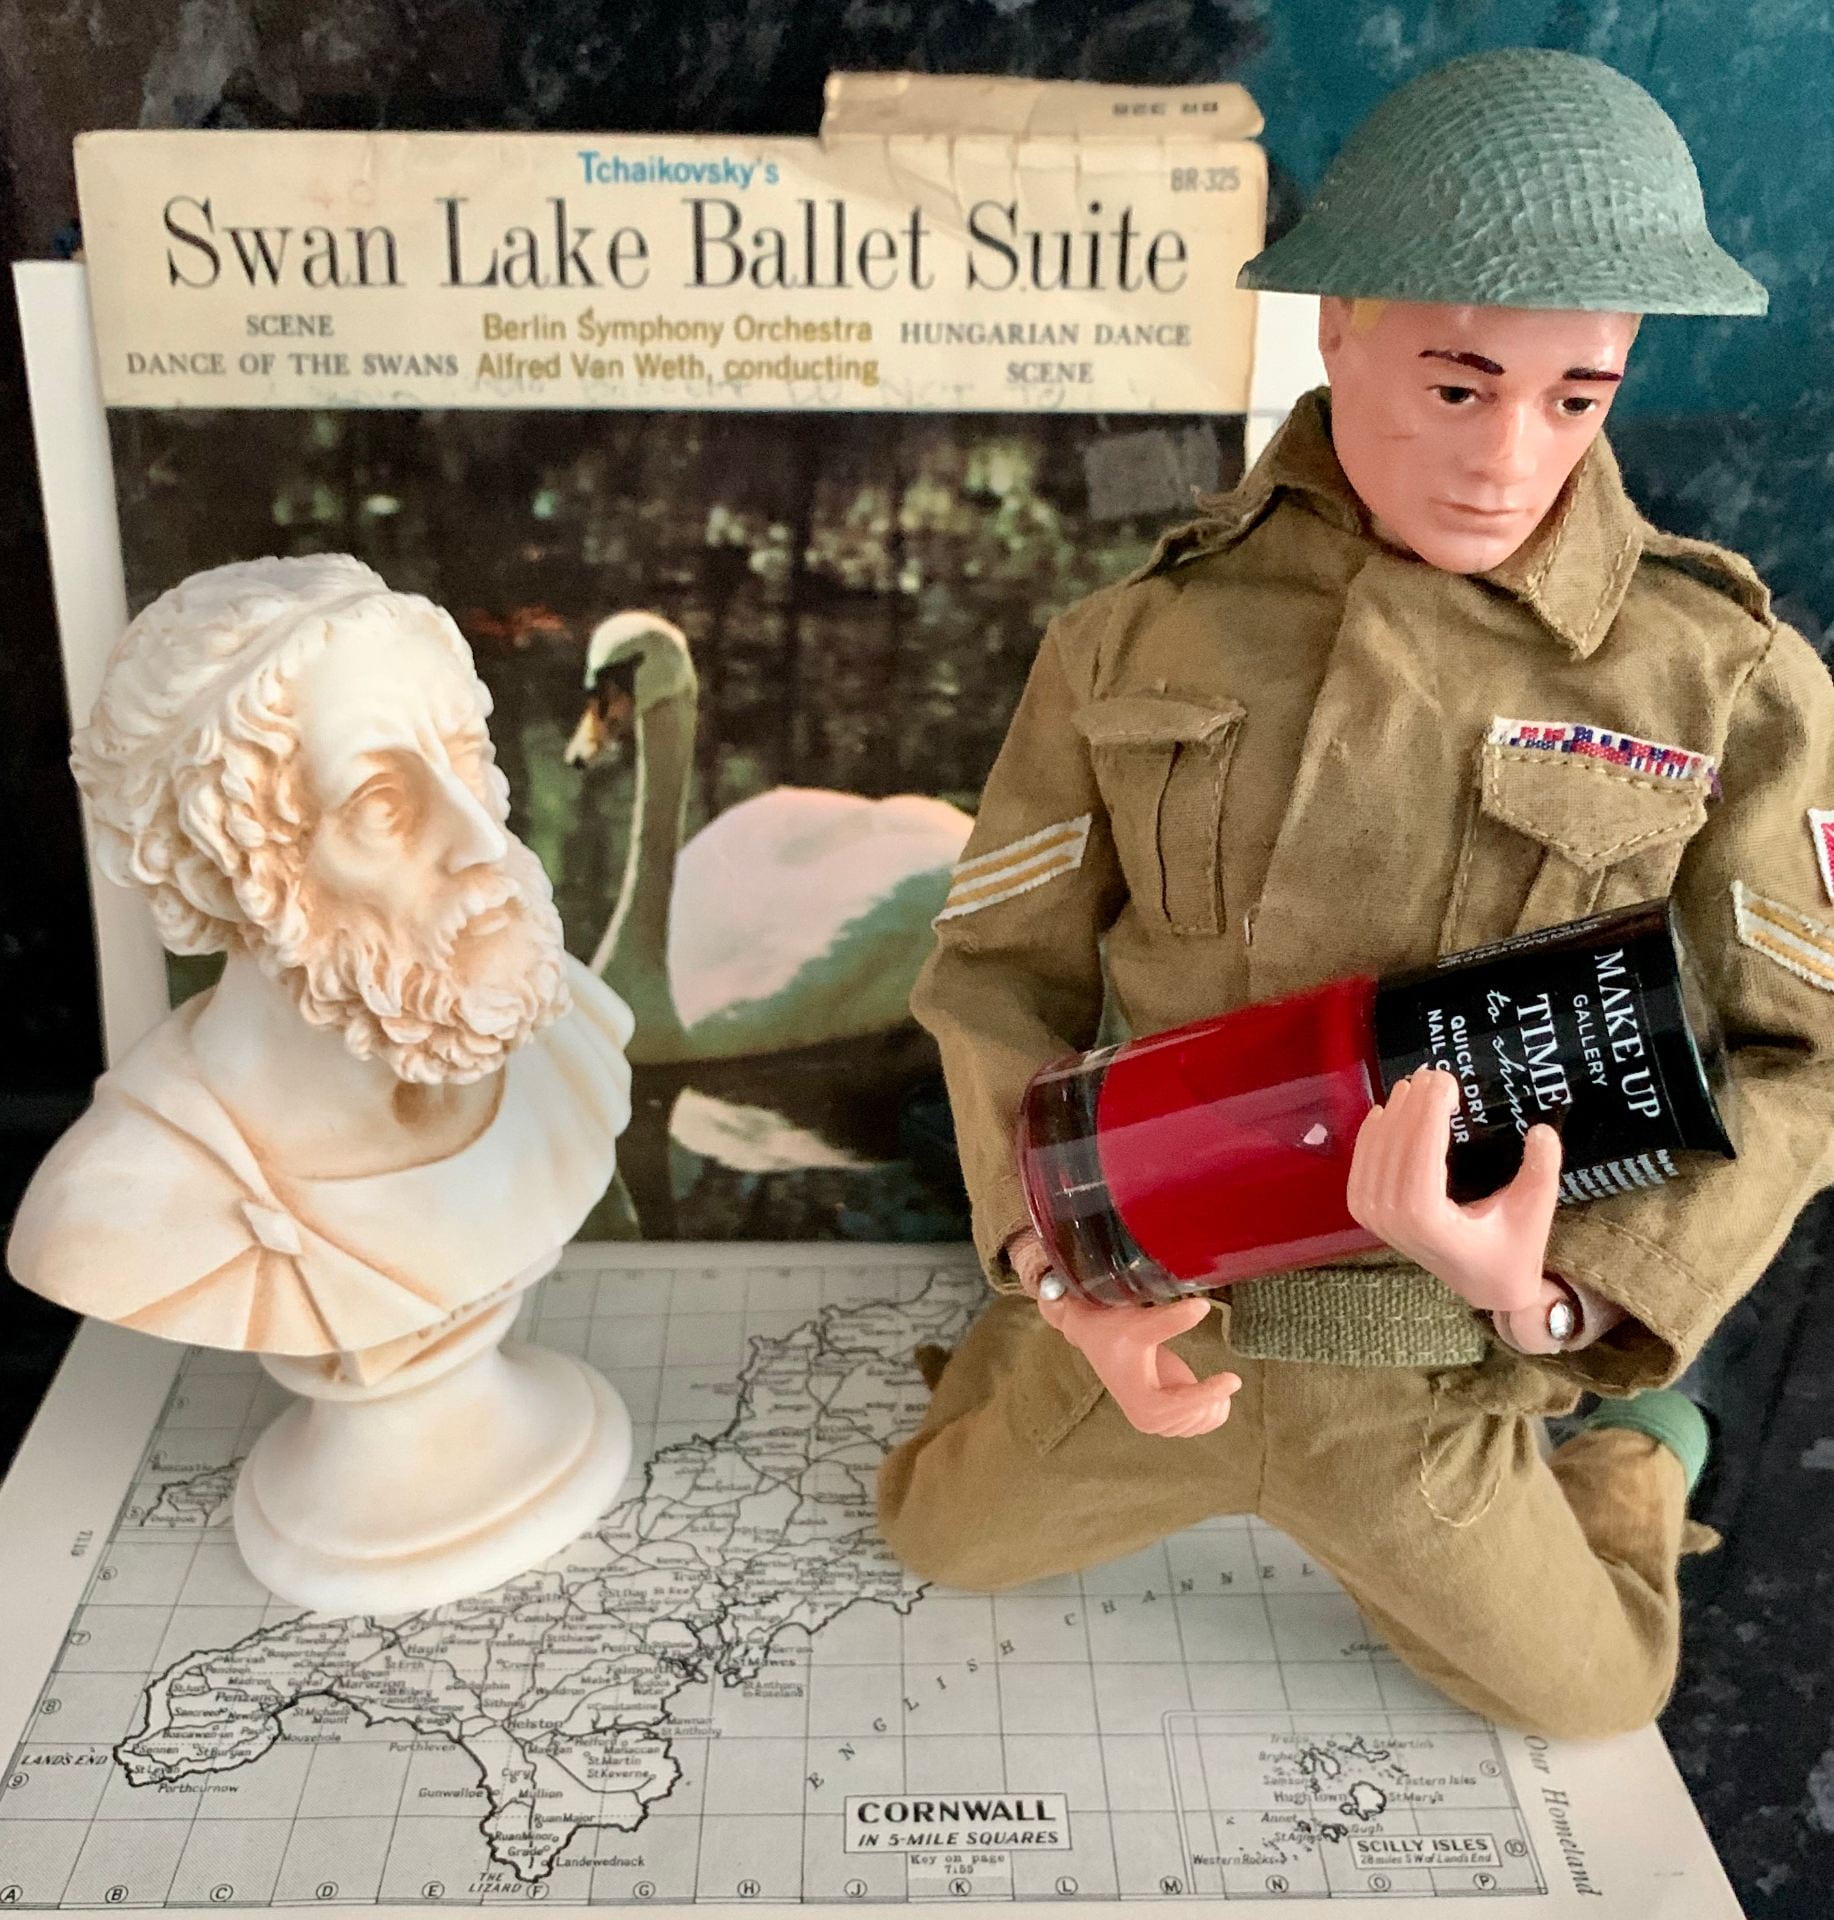 A classical bust and an 'Action Man' toy (holding nail varnish) on top of a map of Cornwall. Behind them is a the sleeve of a vinyl record: Tchaikovsky's Swan Lake Ballet Suite.